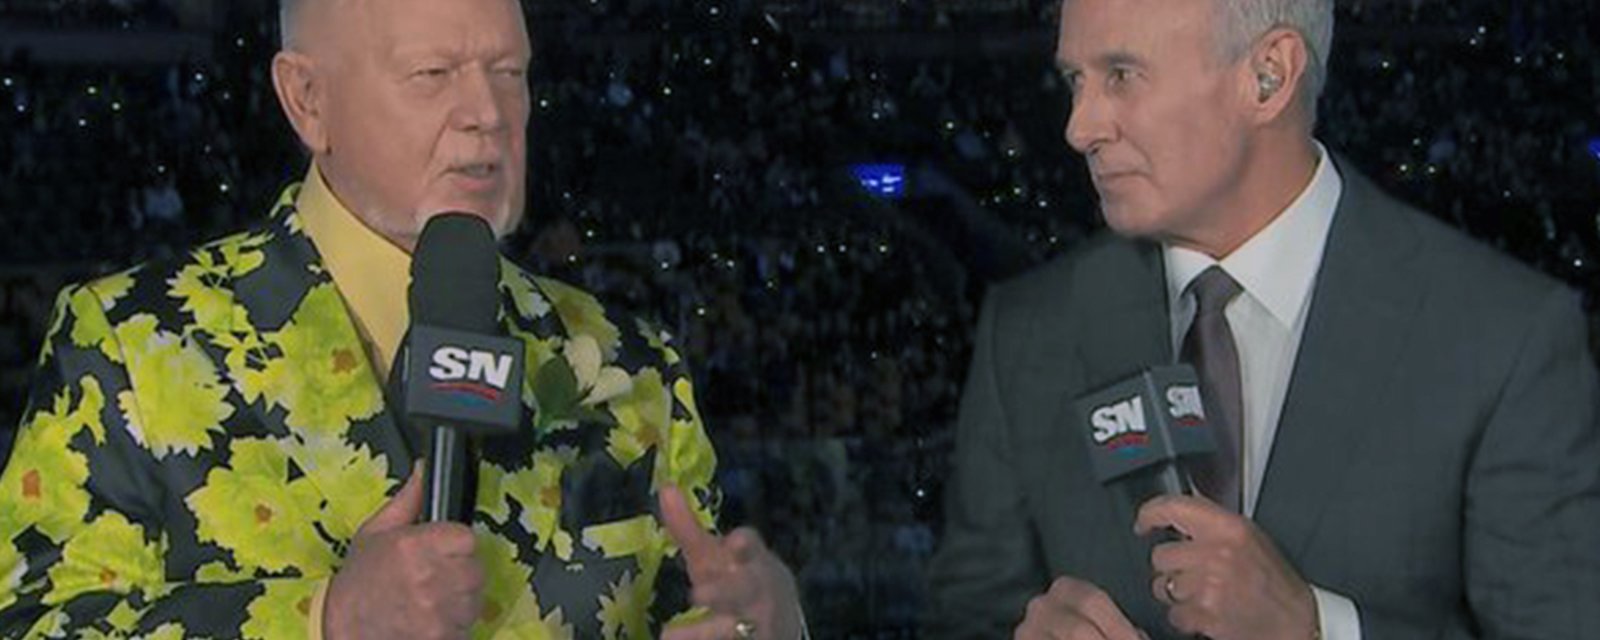 Don Cherry rips Grzelcyk for hit from Sundqvist that sent him to hospital